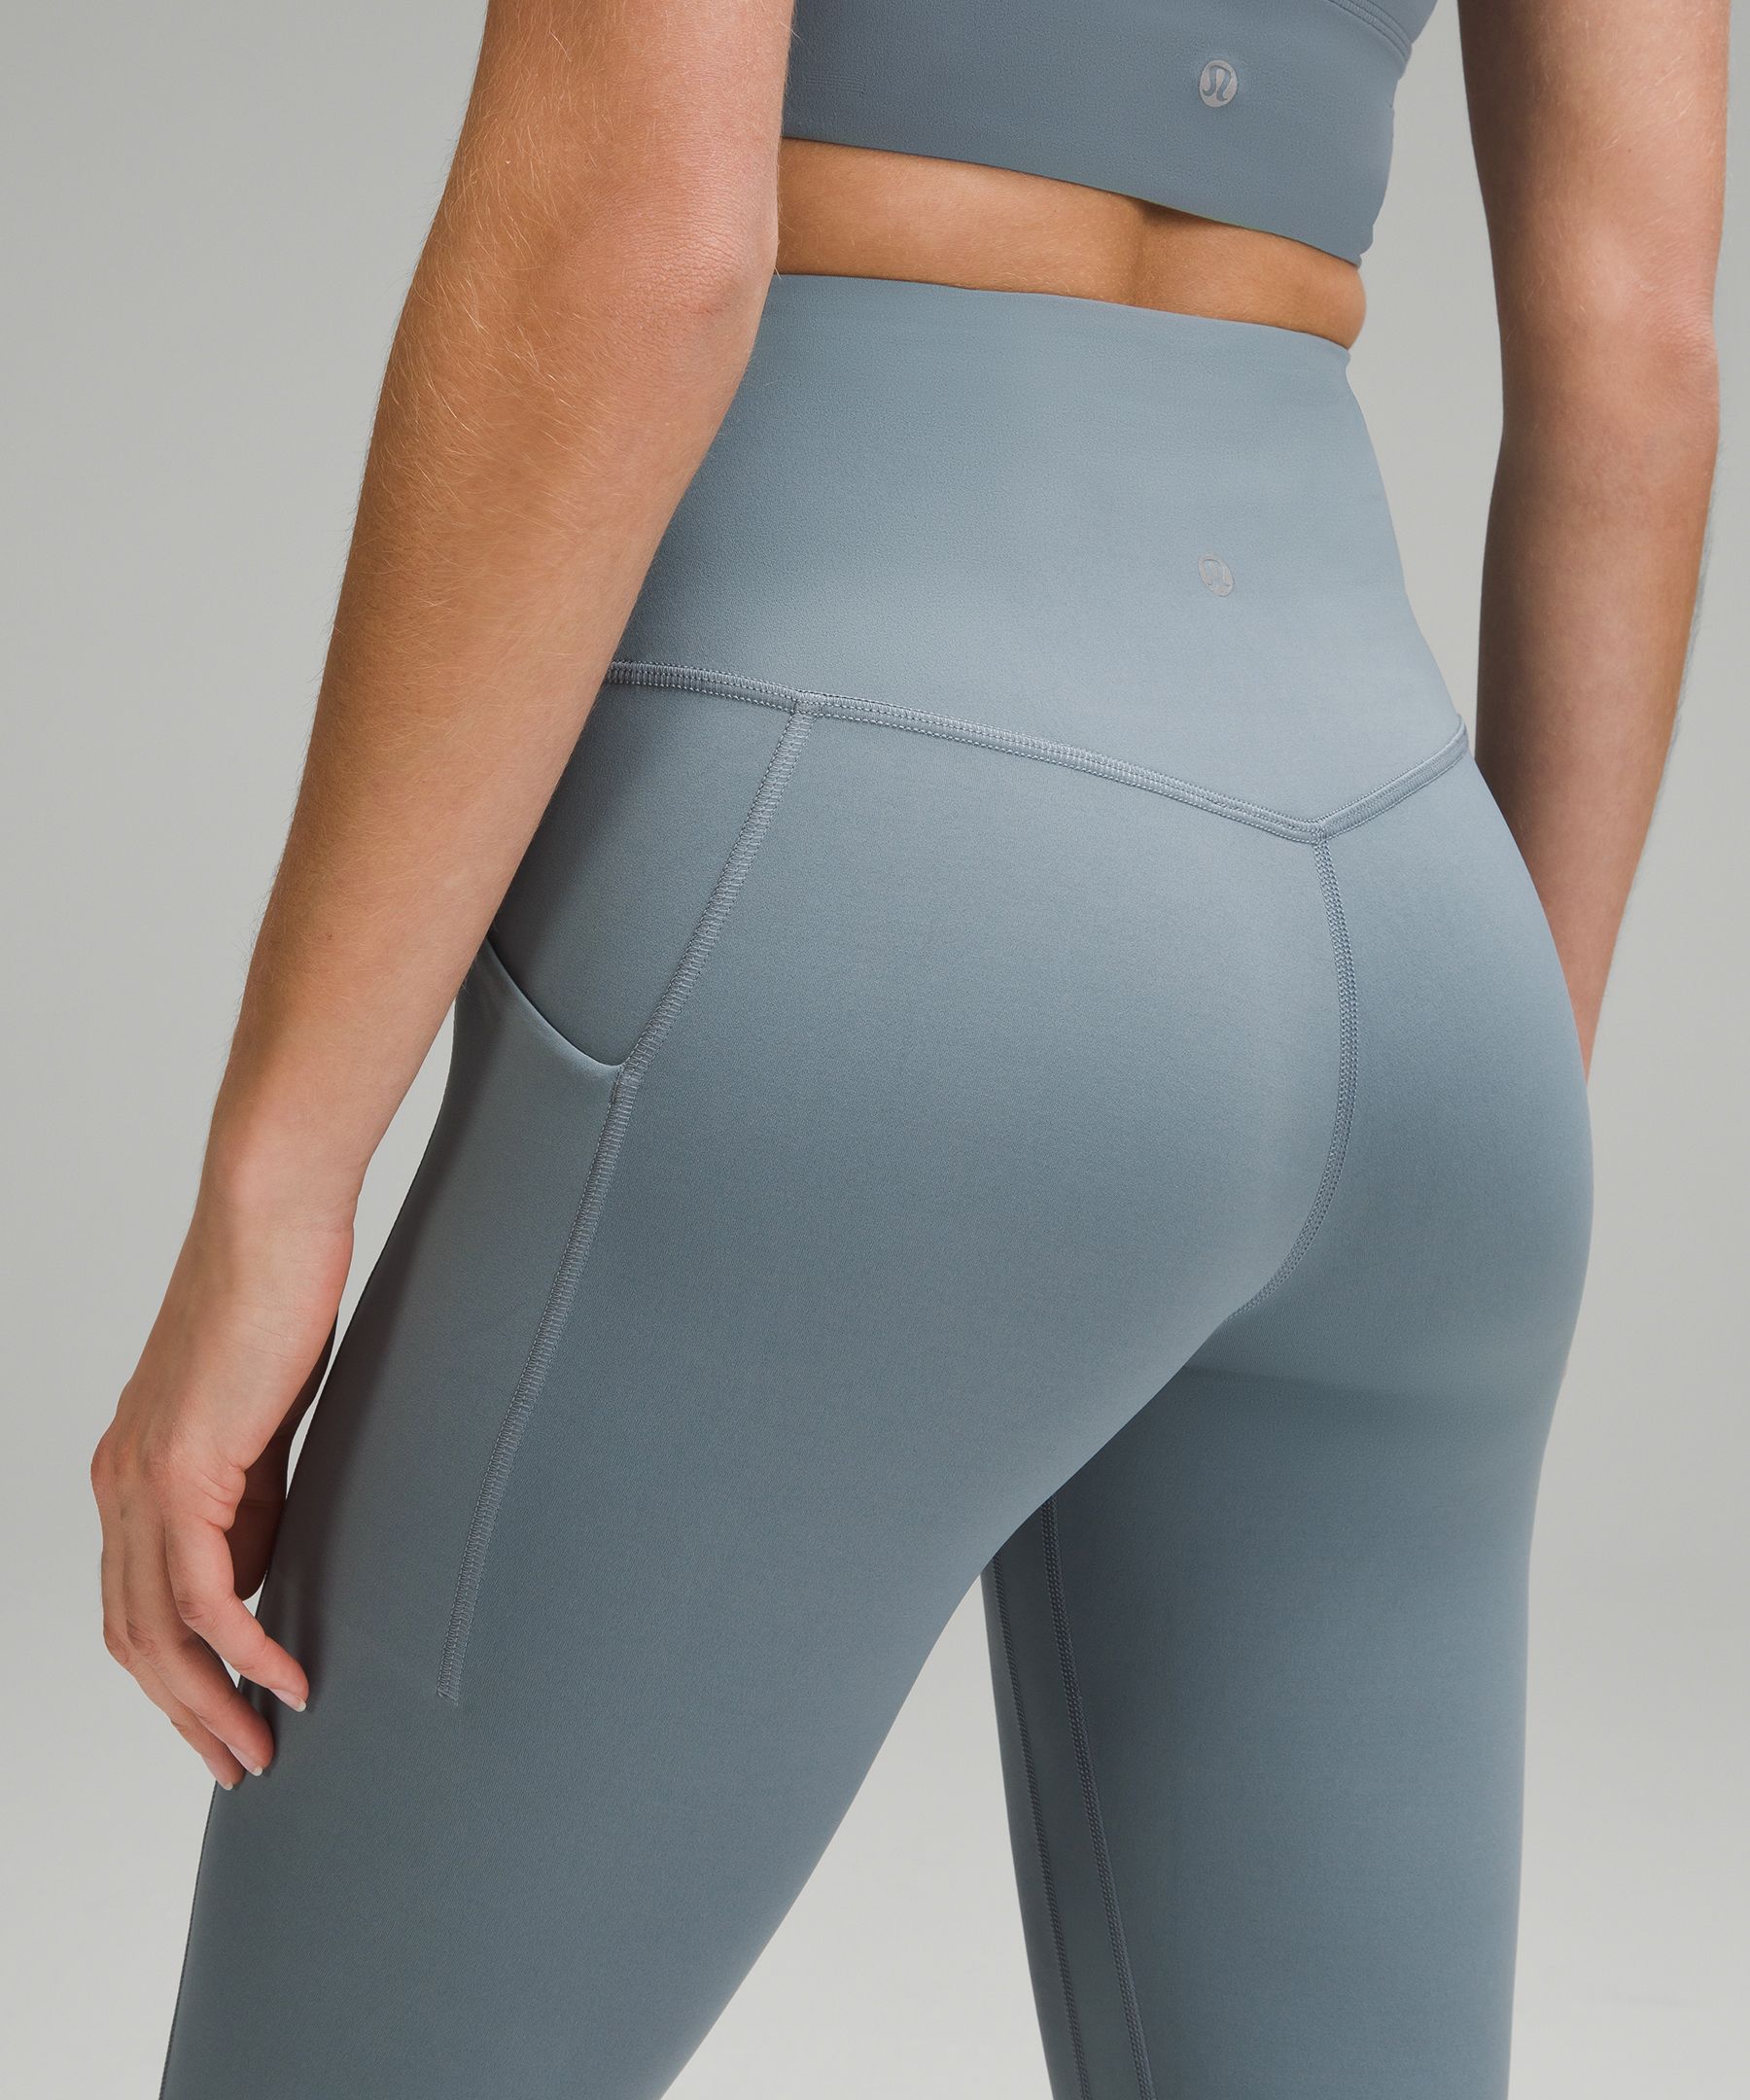 Lululemon Align High-Rise Pant with Pockets 28 - Storm Teal